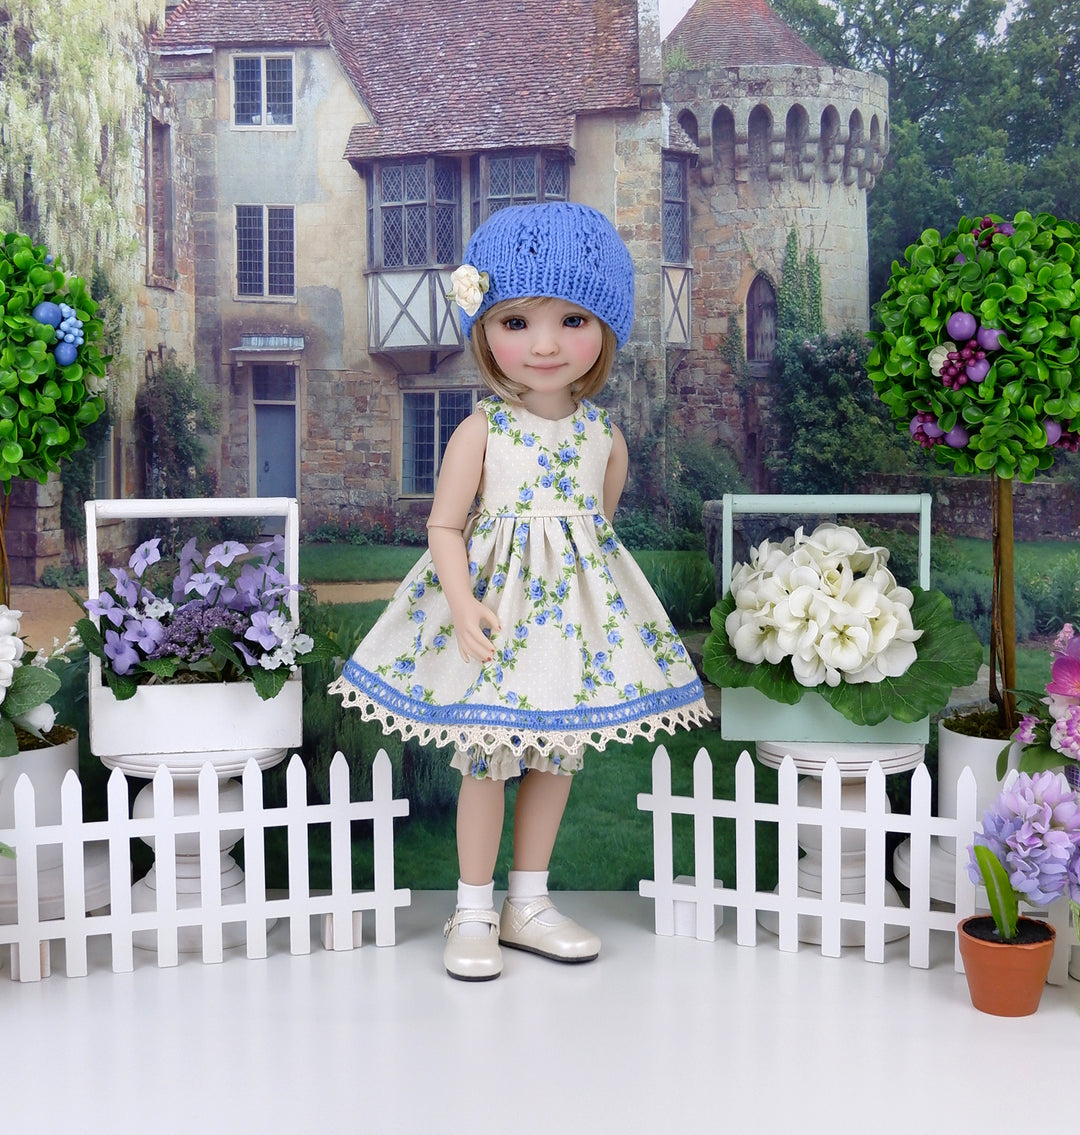 Blue Tea Roses - dress and sweater set with shoes for Ruby Red Fashion Friends doll